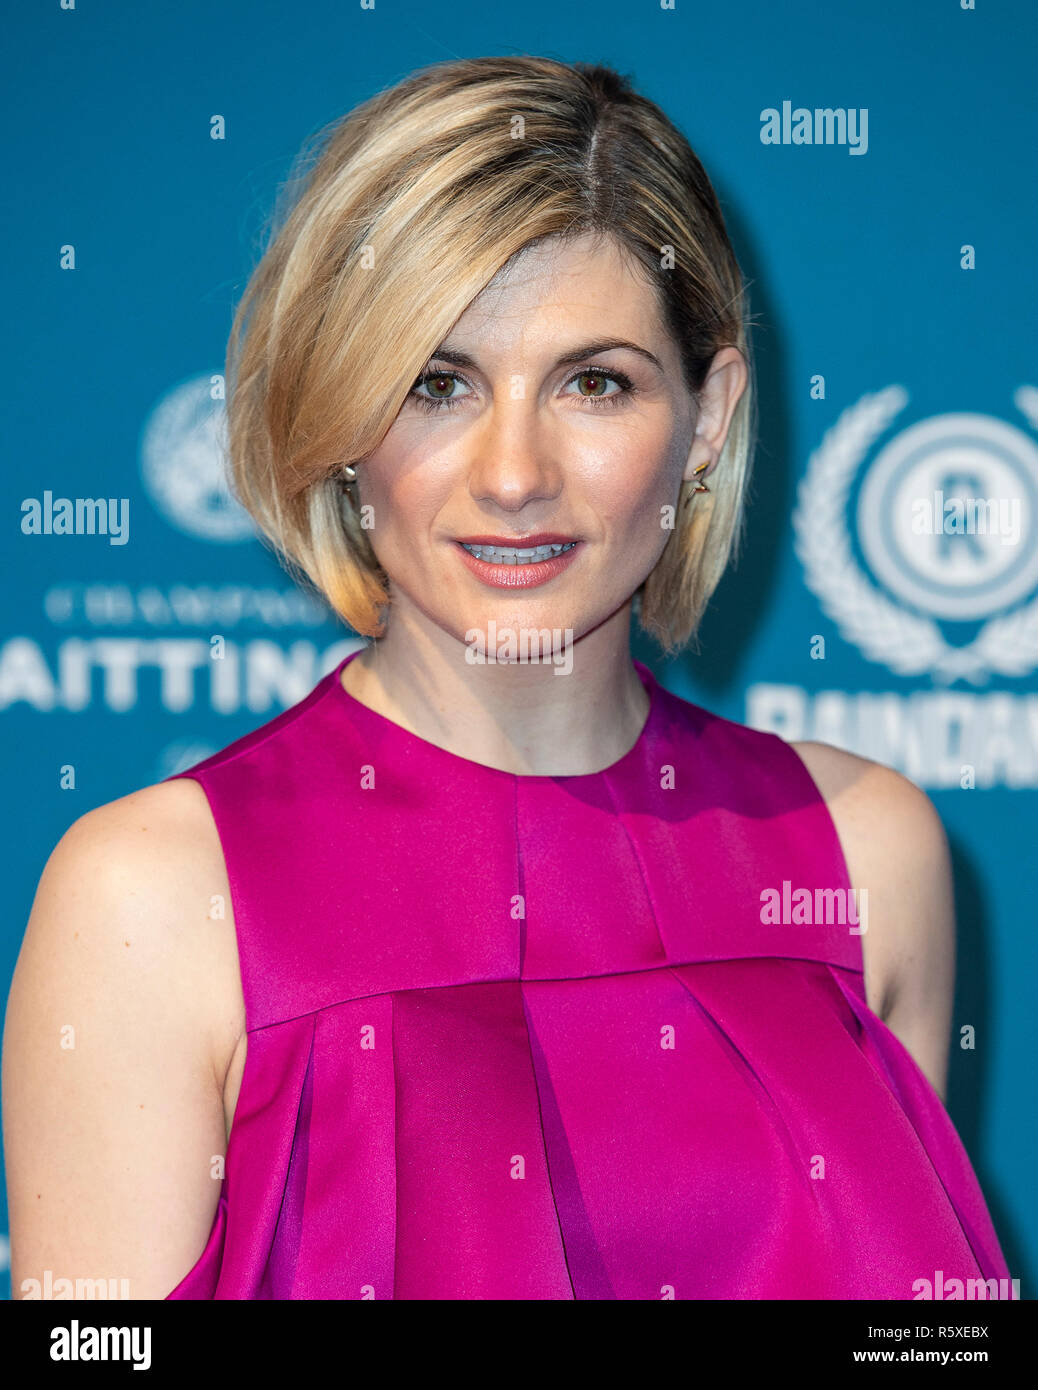 London, UK. 2nd Dec 2018. Jodie Whittaker attends the 21st British Independent Film Awards at Old Billingsgate on December 02, 2018 in London, England. Credit: Gary Mitchell, GMP Media/Alamy Live News Stock Photo